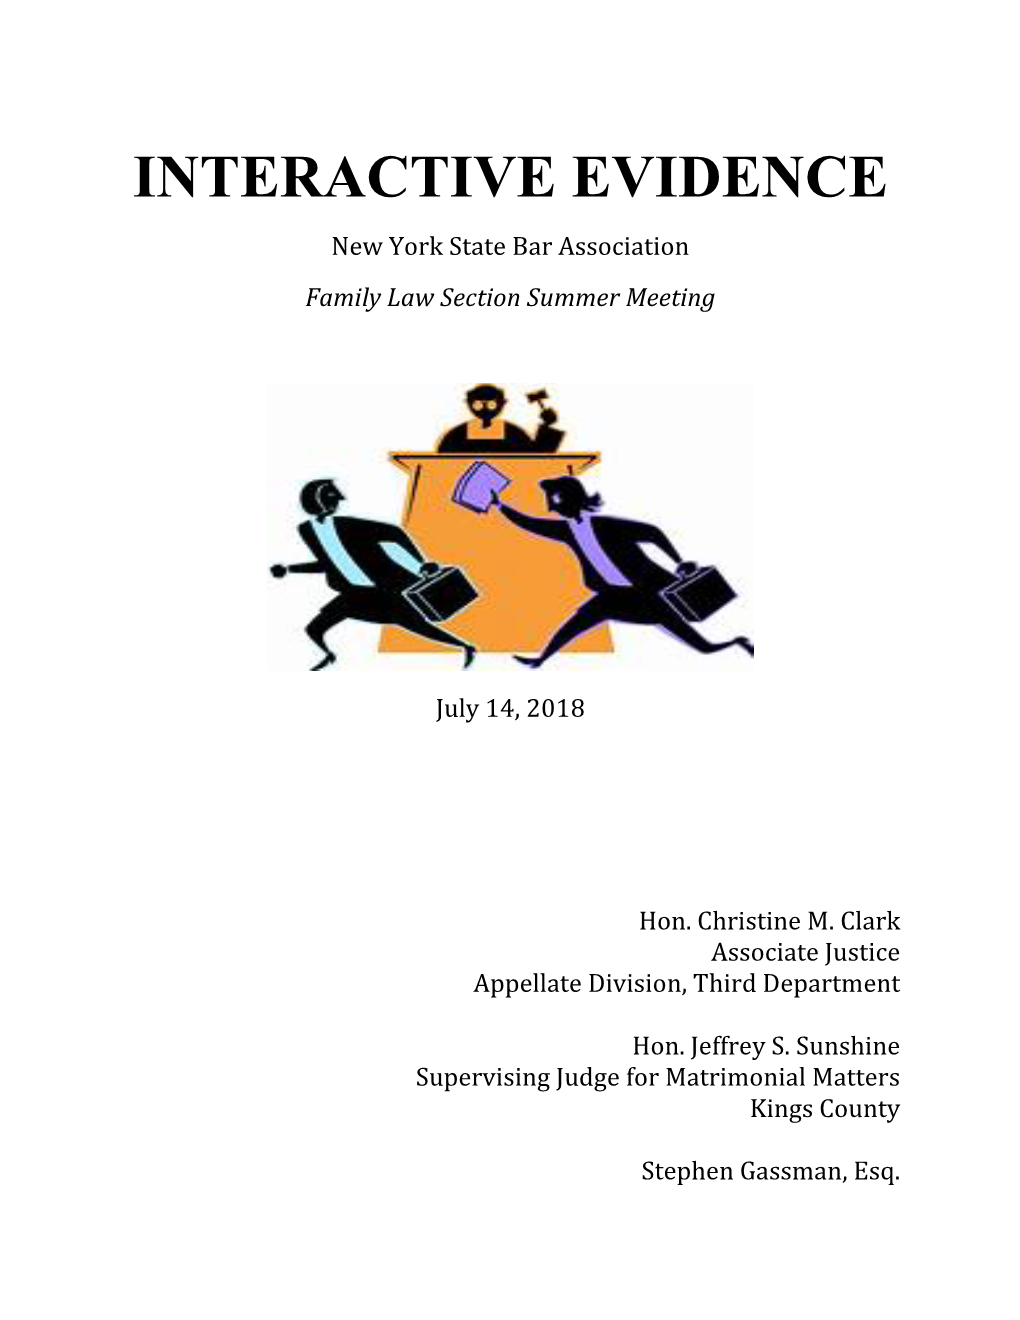 INTERACTIVE EVIDENCE New York State Bar Association Family Law Section Summer Meeting